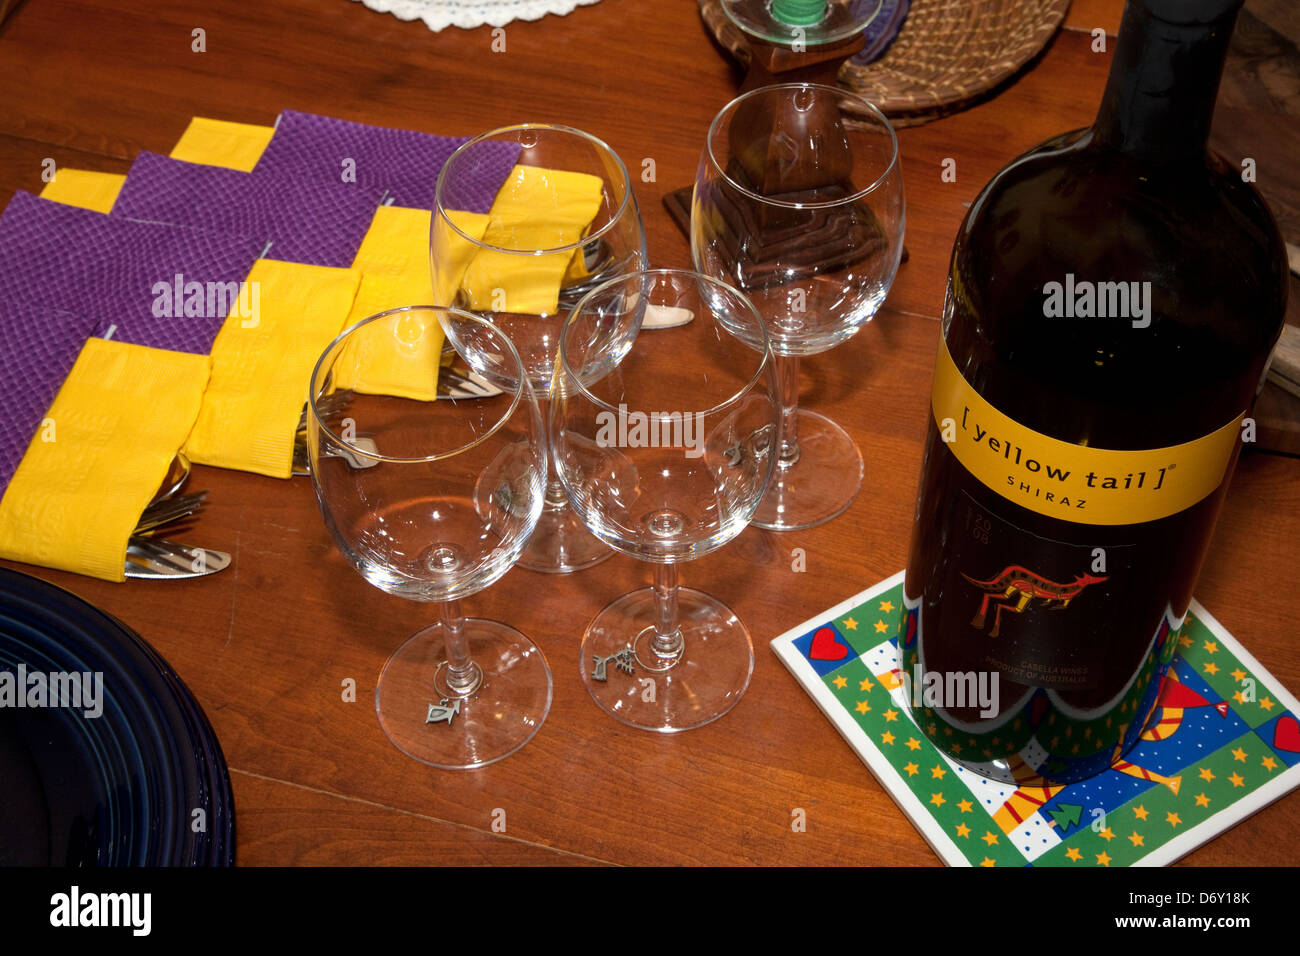 Grouping of wine glasses napkins and utensils on the table. St Paul Minnesota MN USA Stock Photo